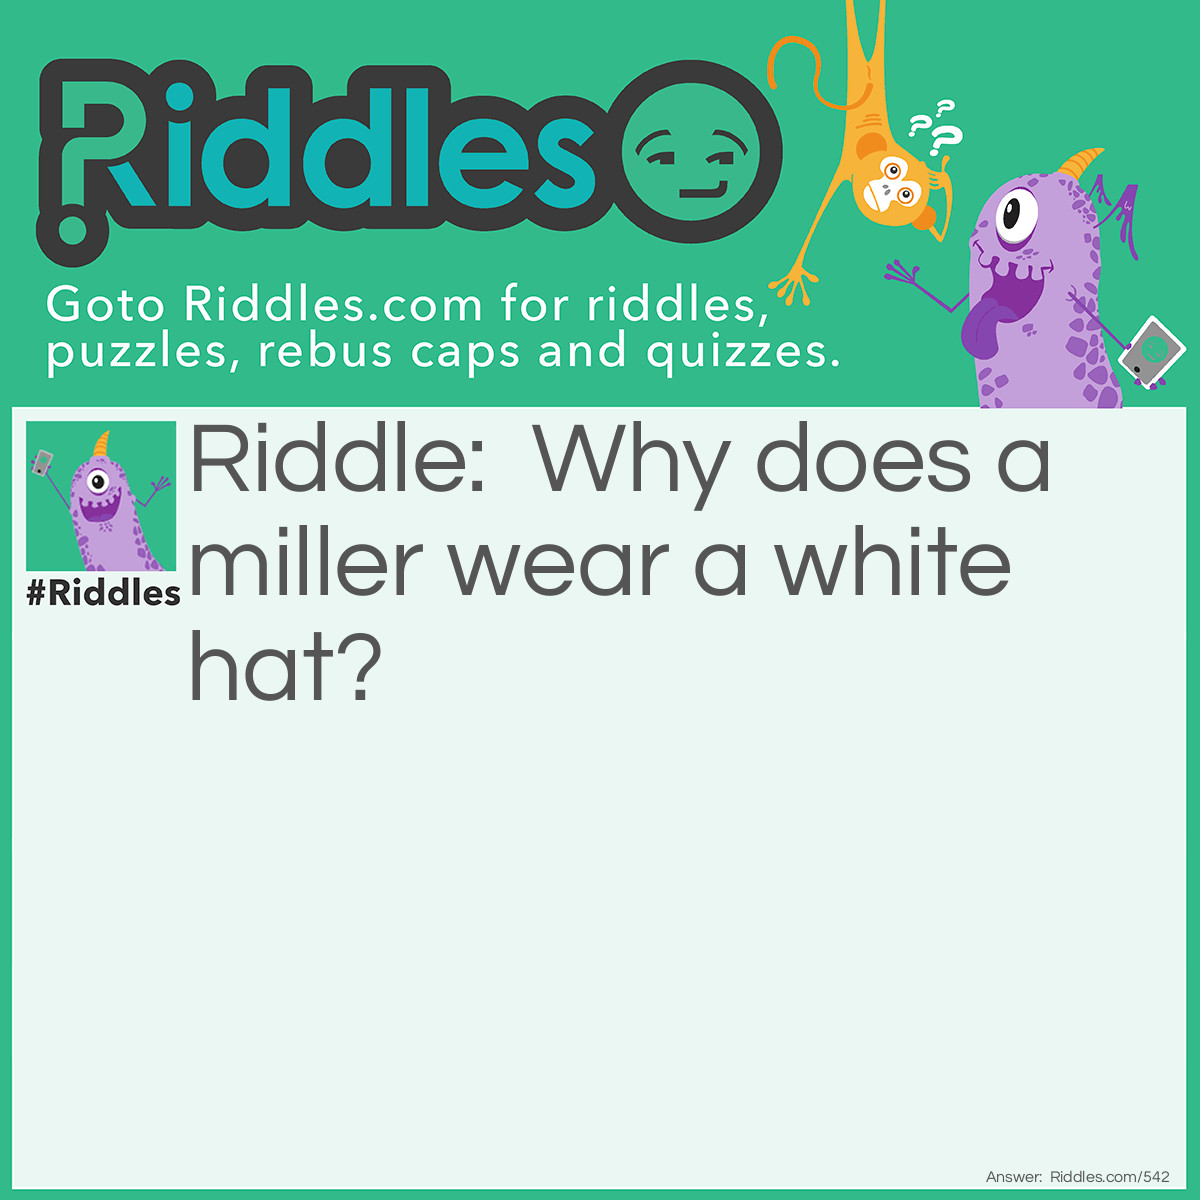 Riddle: Why does a miller wear a white hat? Answer: To keep his head warm.